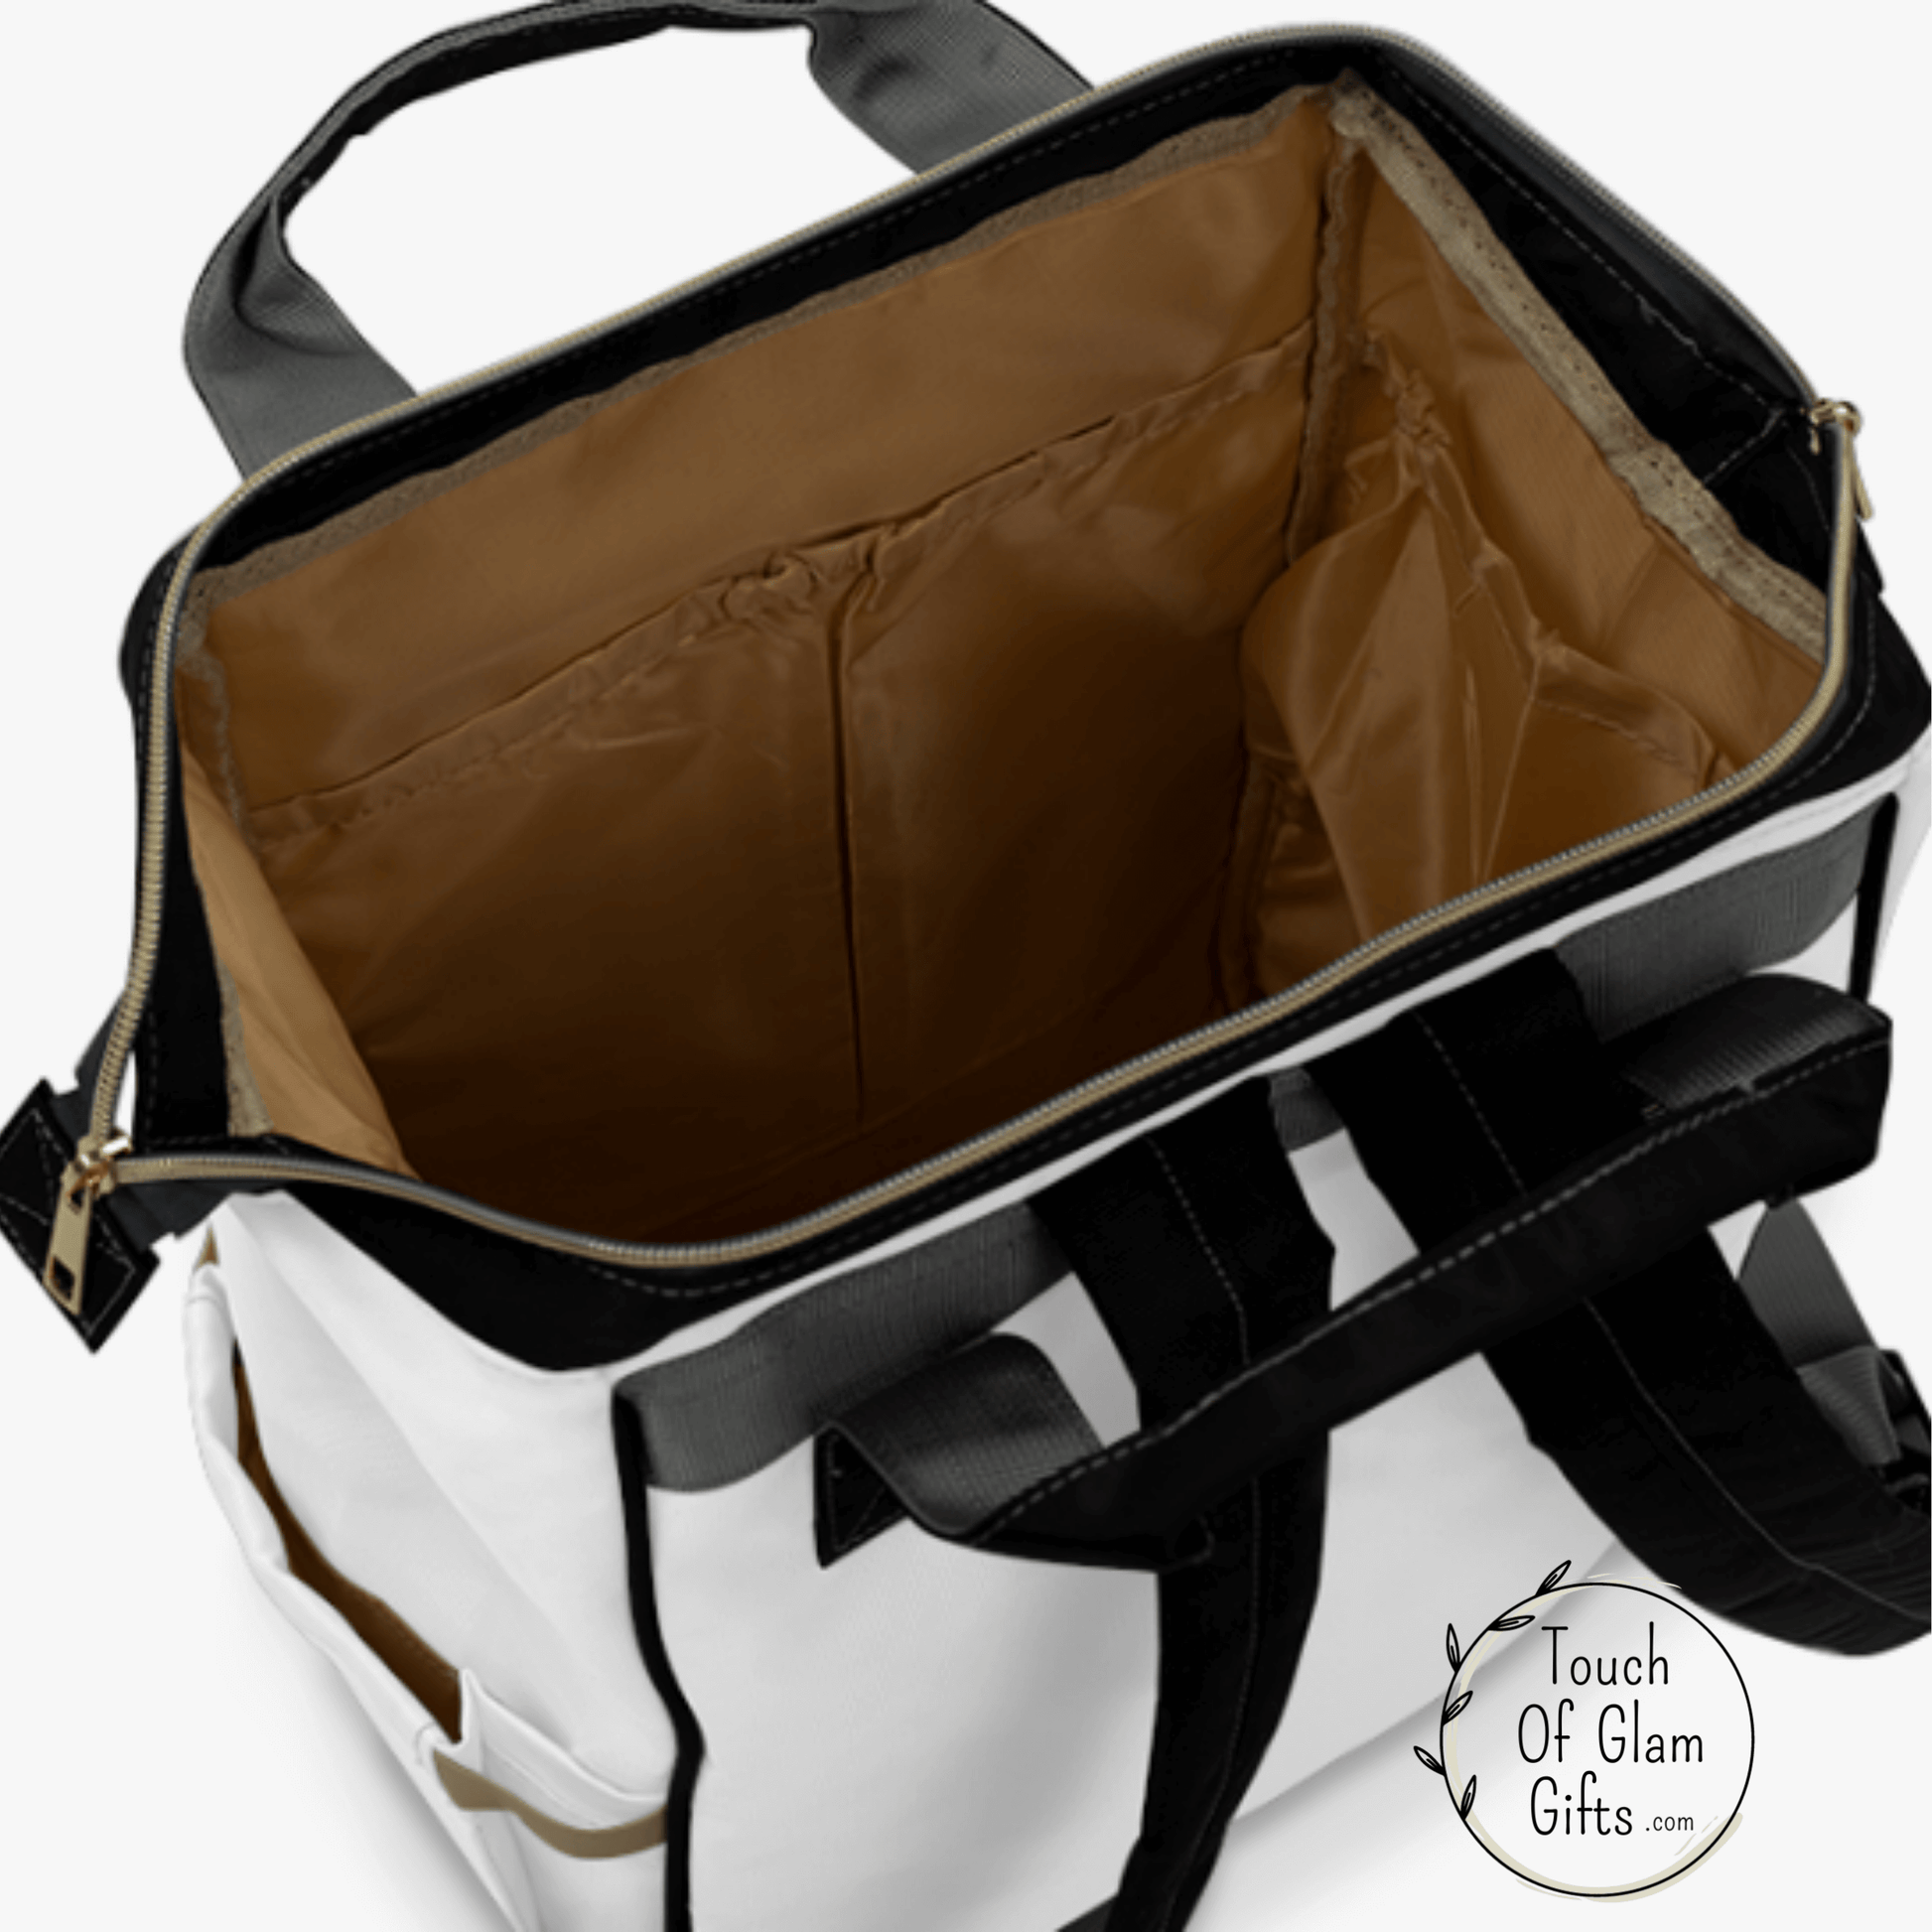 The main compartment is a large zippered opening. This bag is perfect as a diaper bag or travel bag.